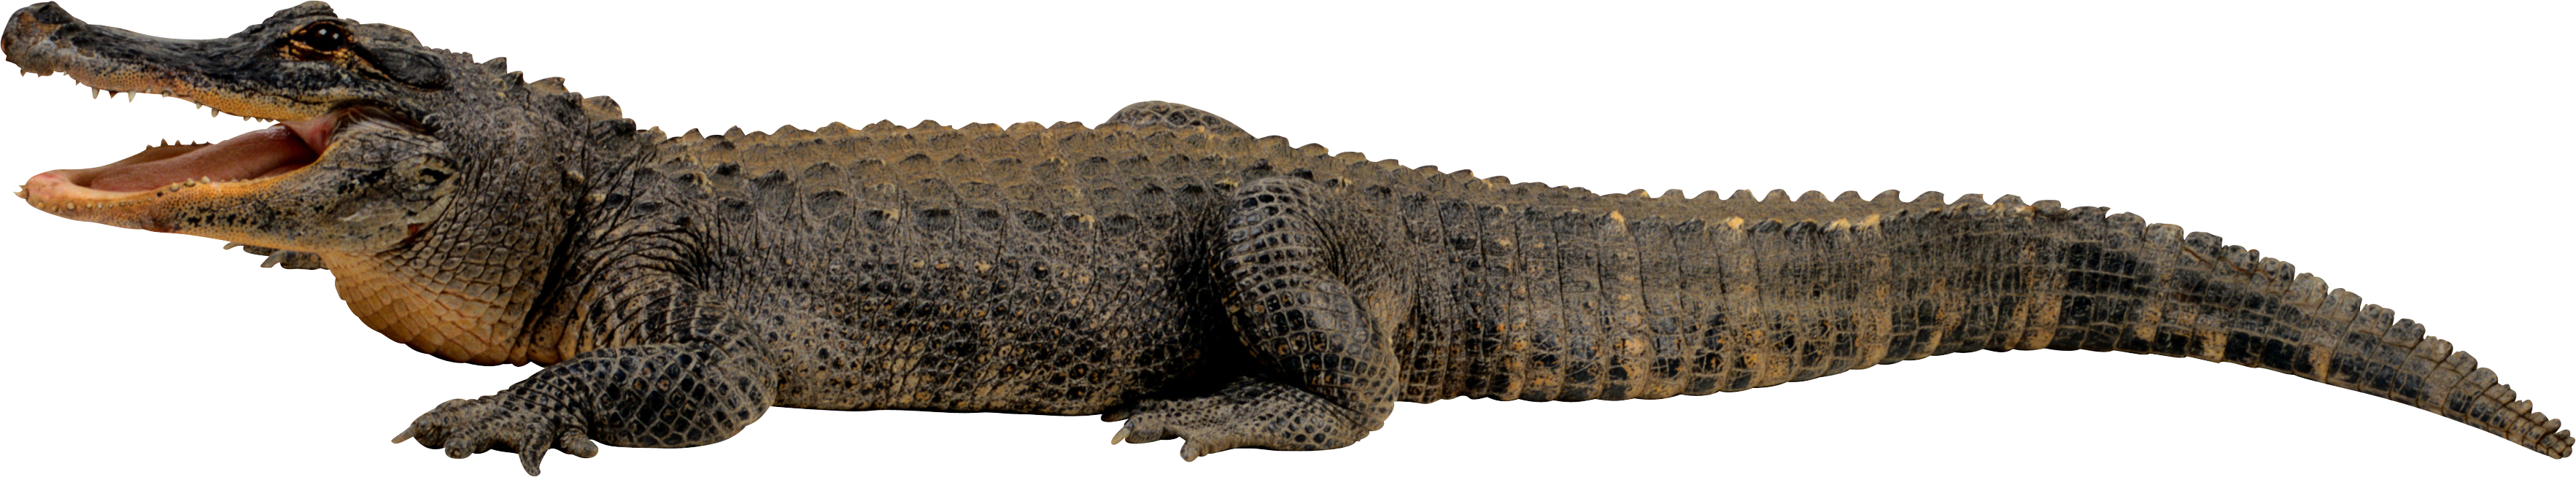 Water clipart alligator. Crocodile png images free